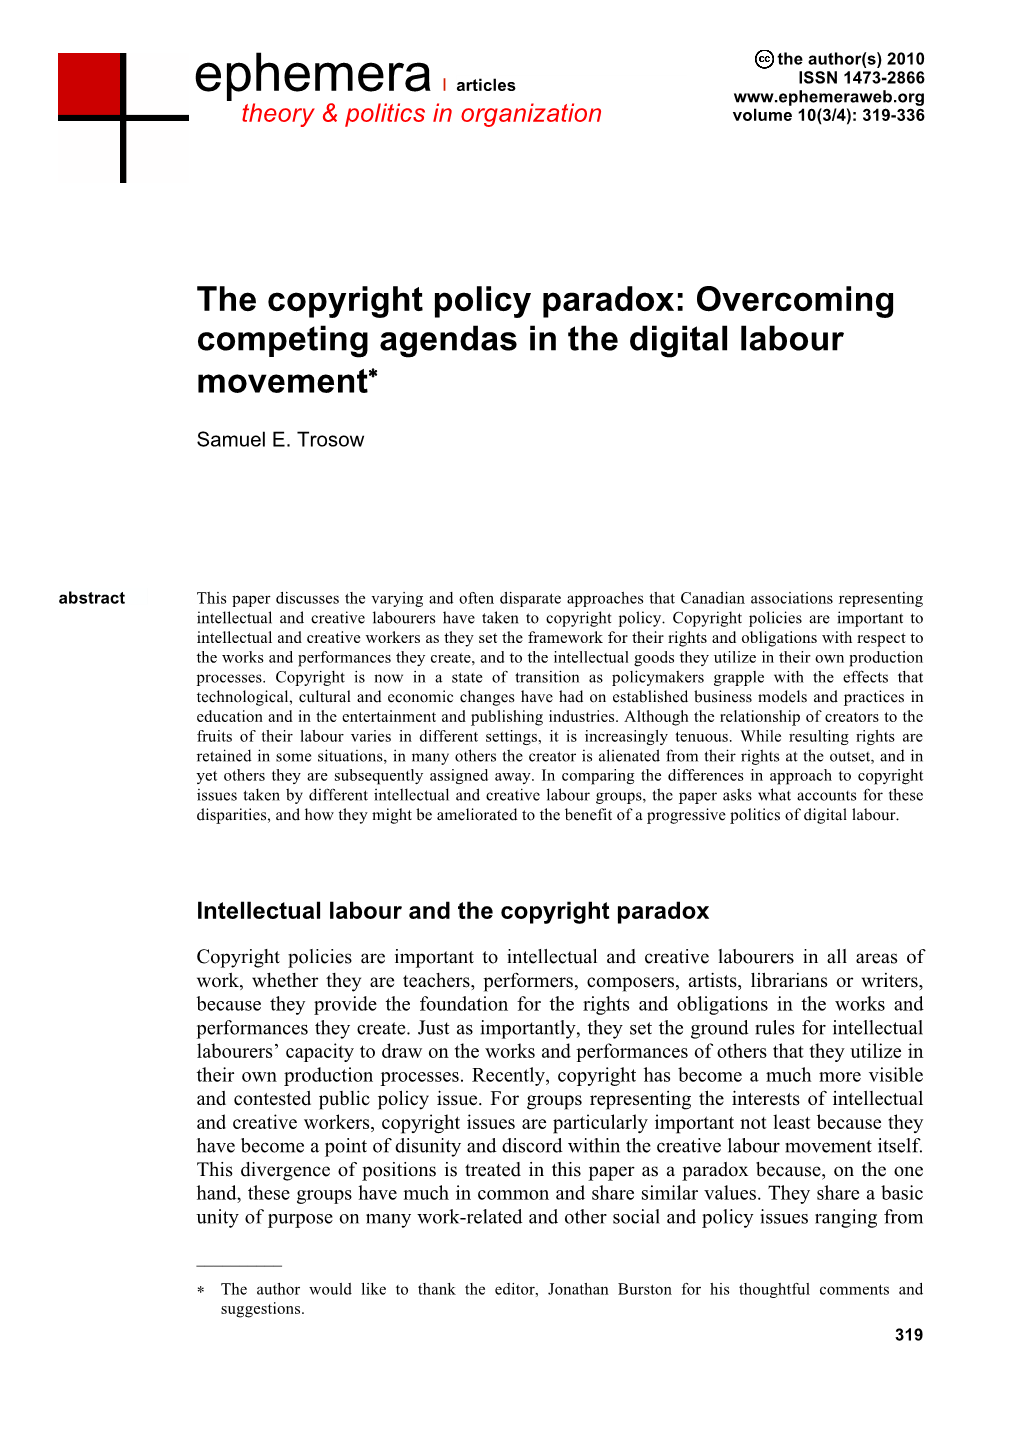 The Copyright Policy Paradox: Overcoming Competing Agendas in the Digital Labour Movement∗